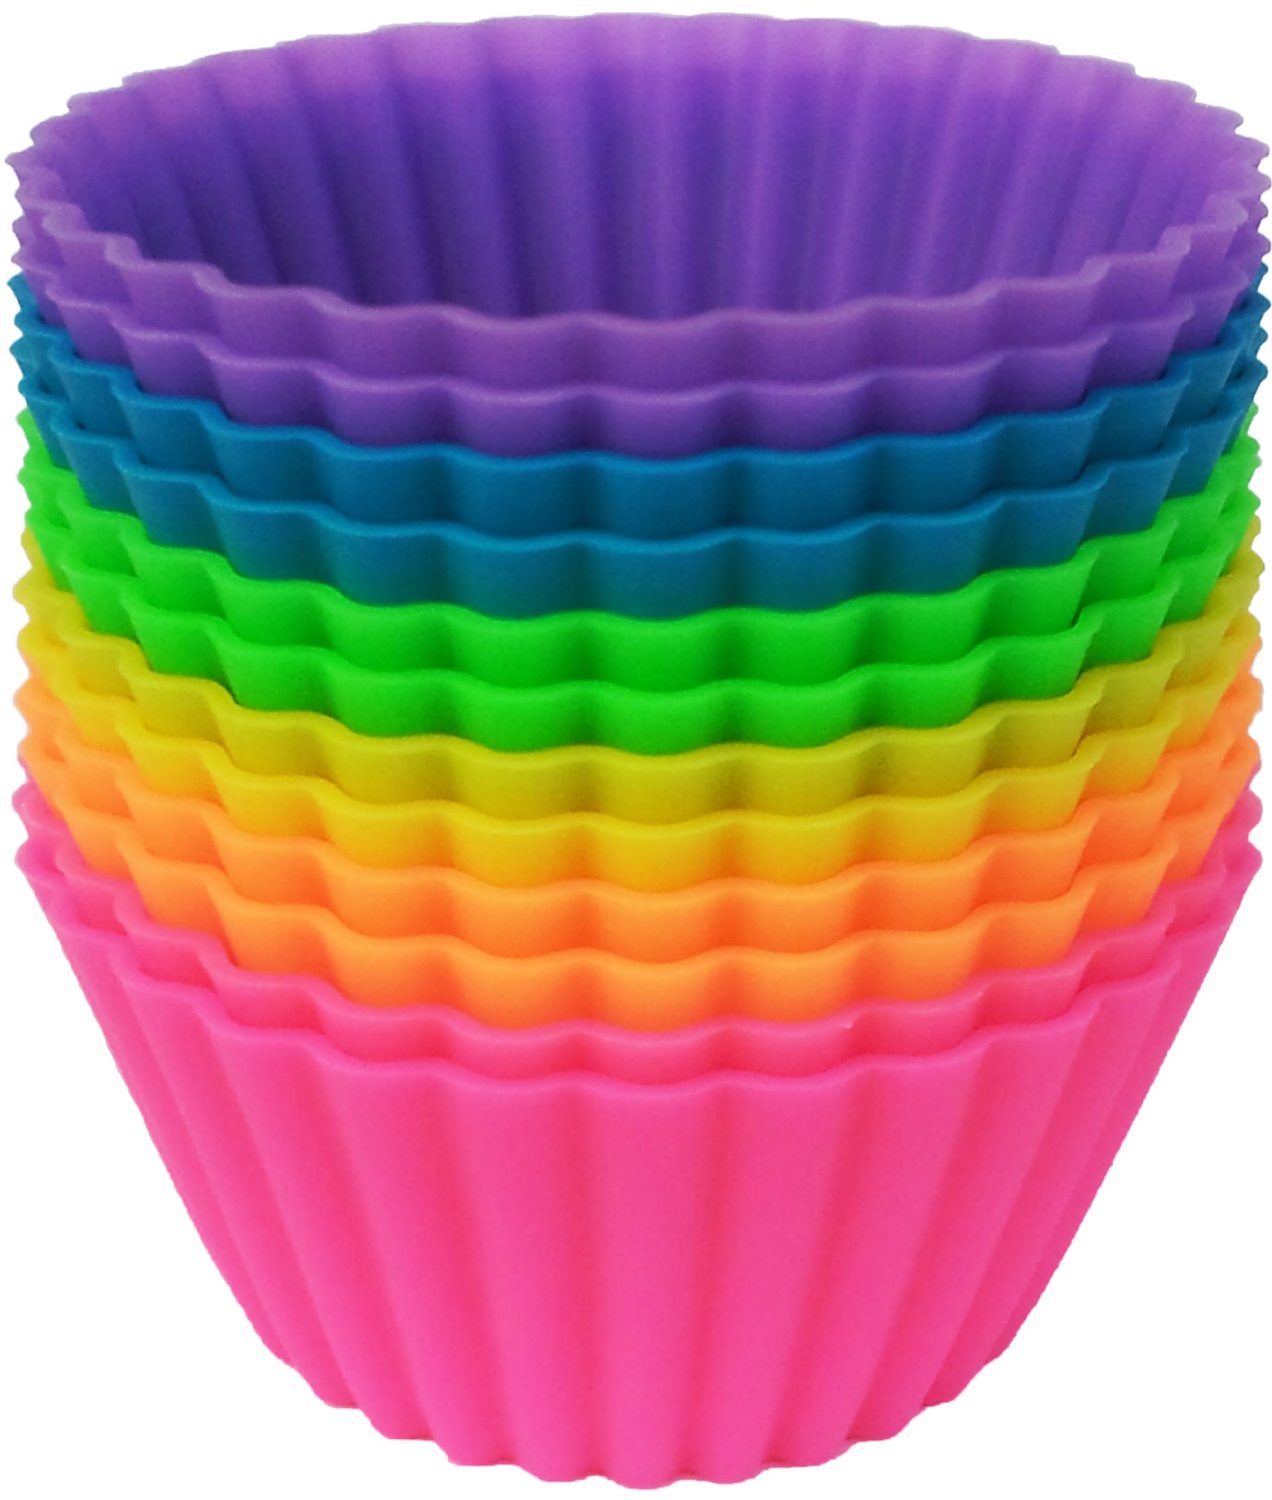 Pantry Elements Silicone Baking Cups, Island Collection - 12 Tropical Cupcake  Liners in a Container by Pantry Elements - Shop Online for Kitchen in  Australia